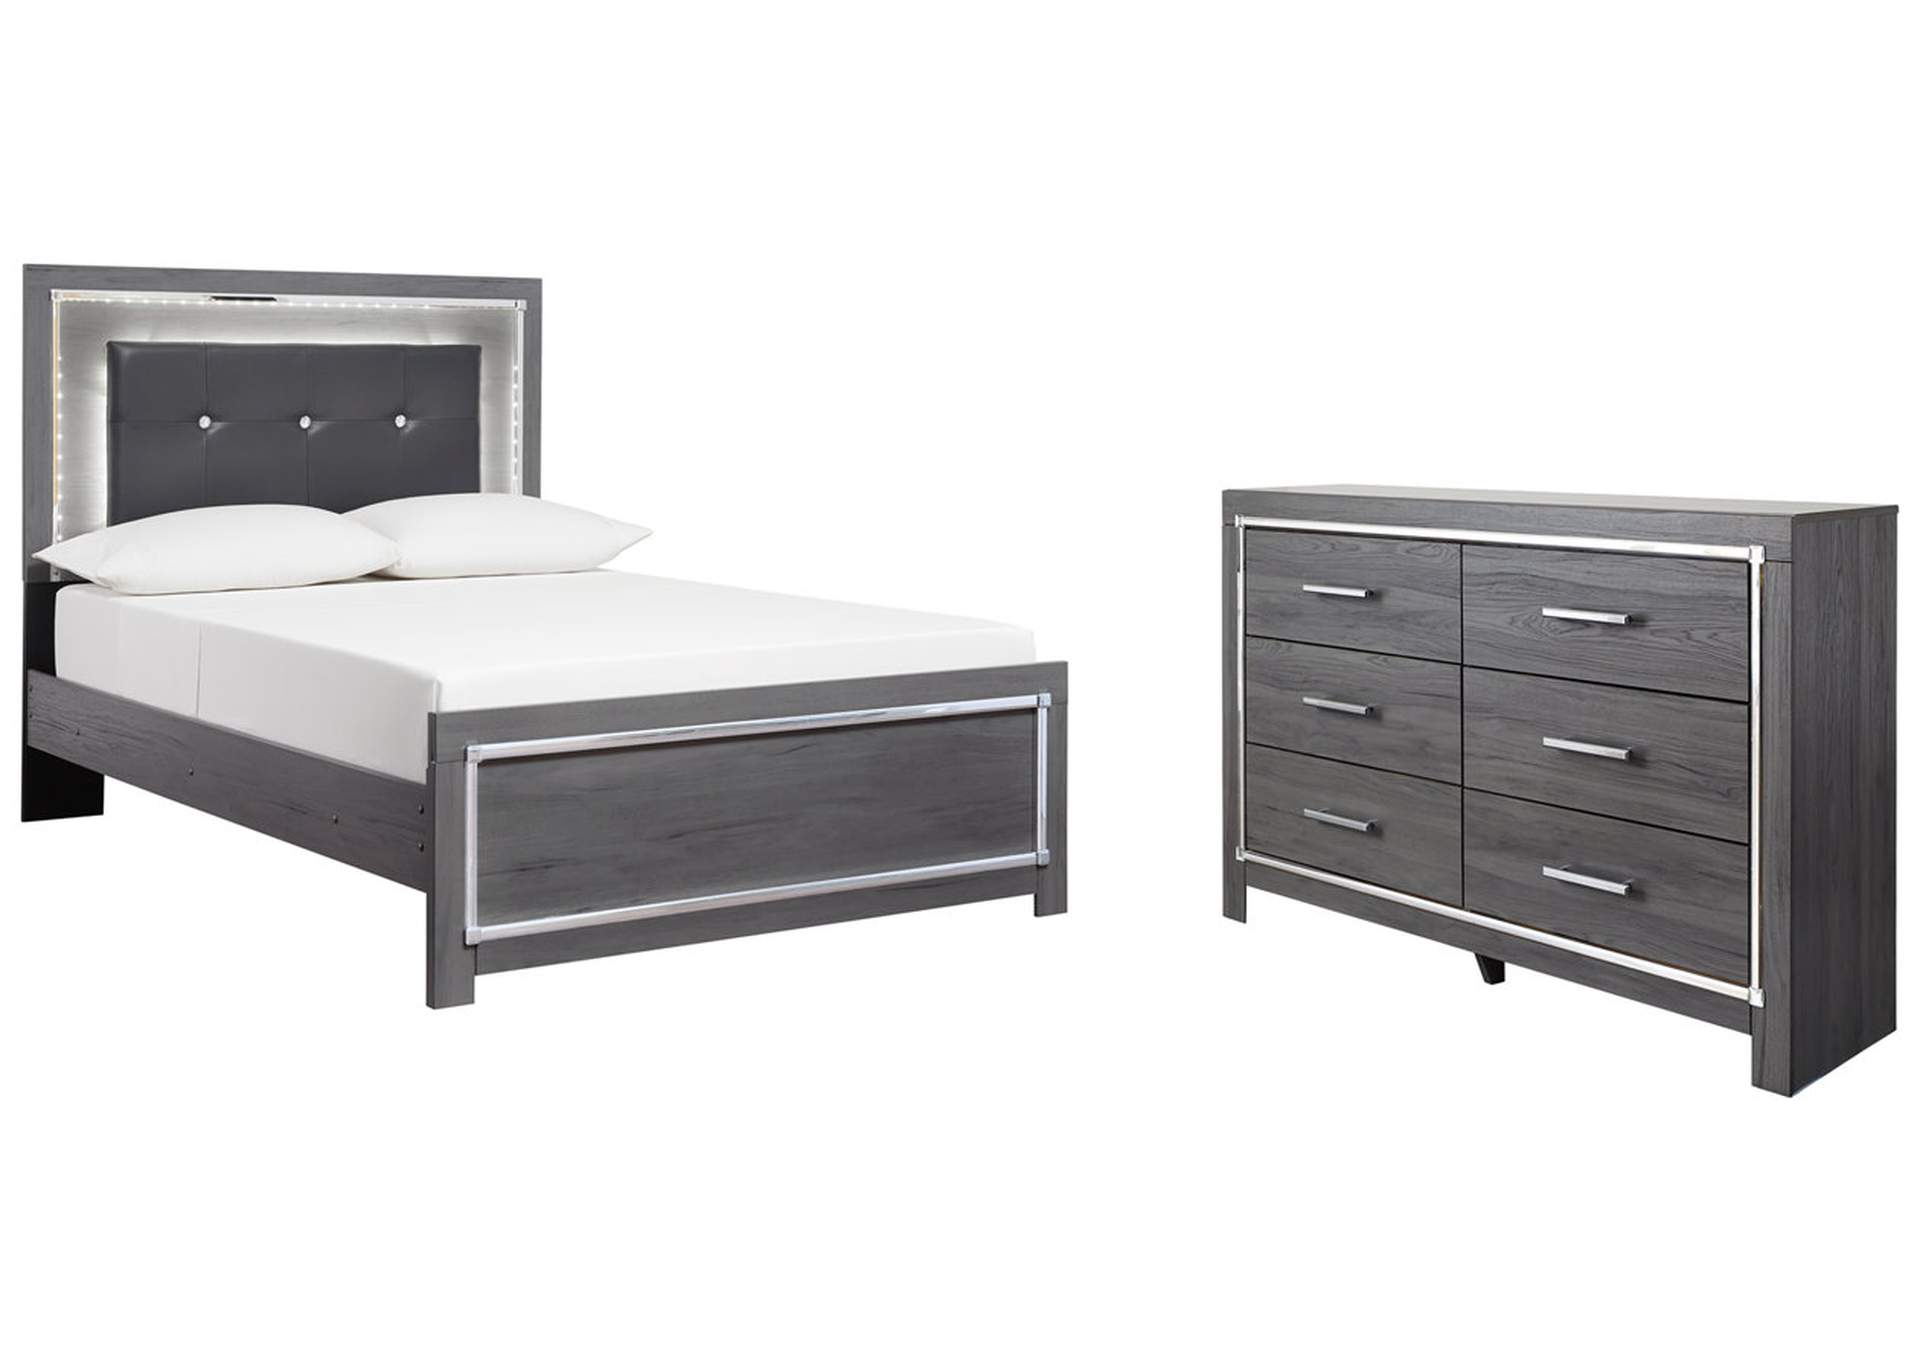 Lodanna Full Panel Bed with Dresser,Signature Design By Ashley